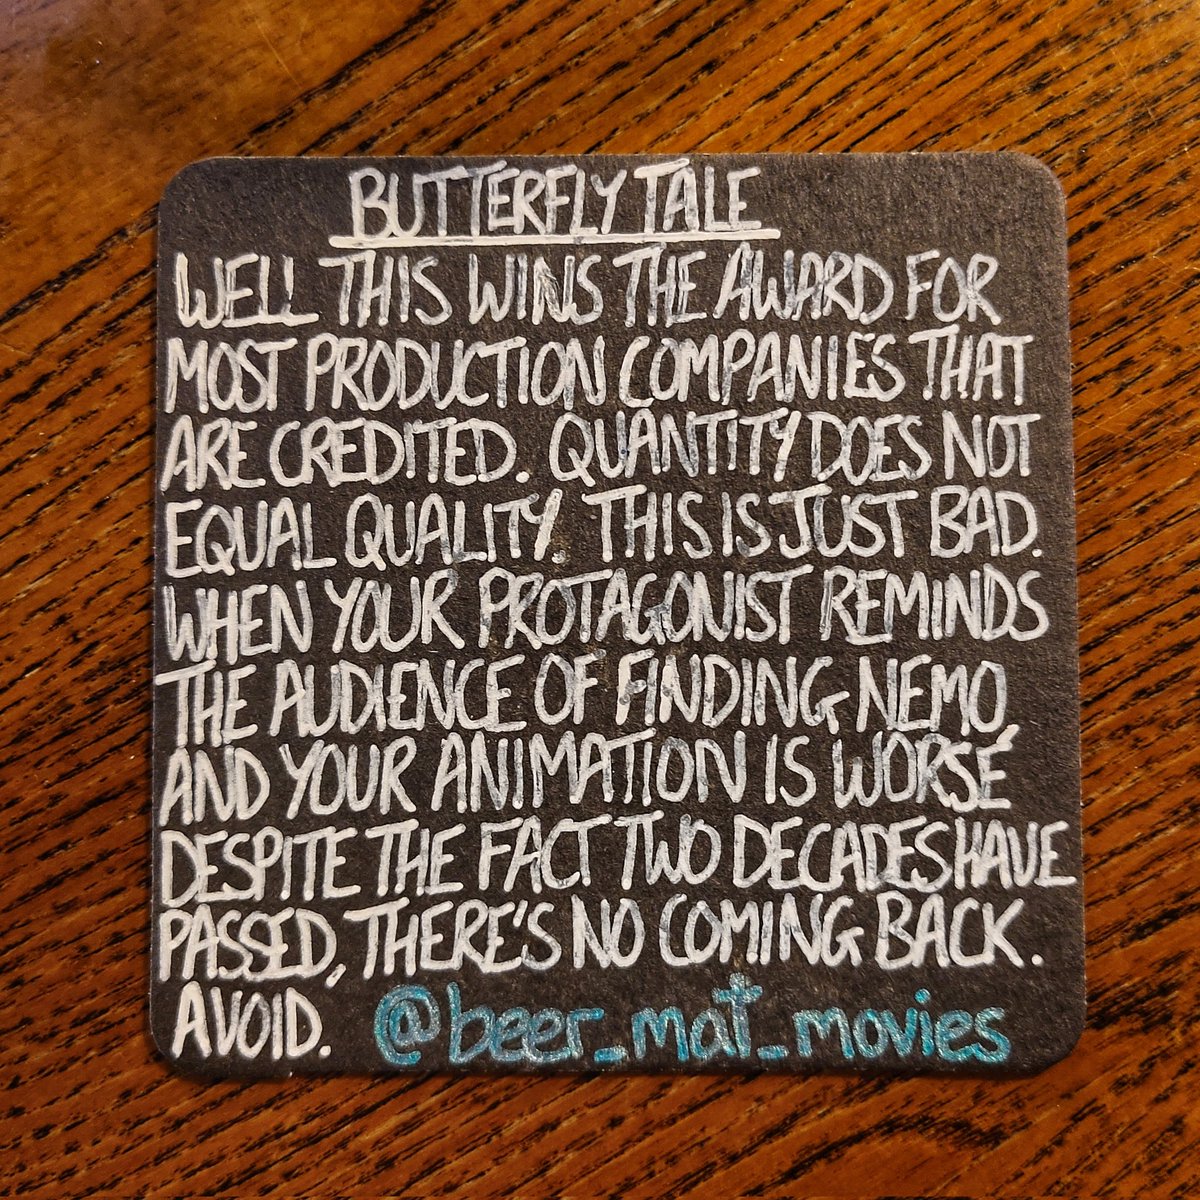 New release review: Butterfly Tale

#FindingNemo